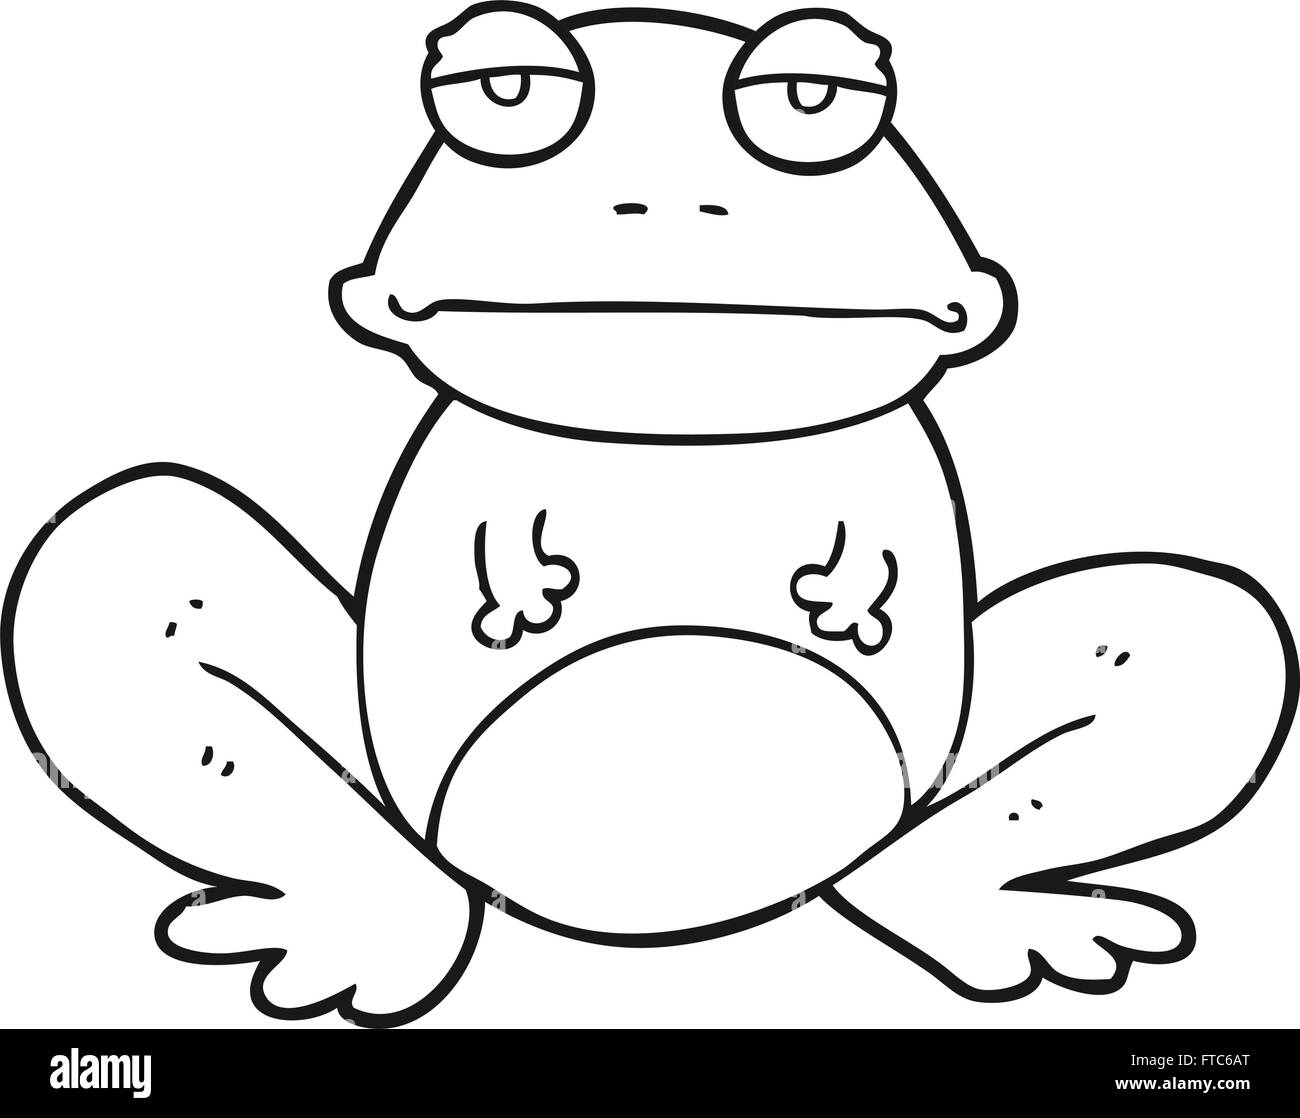 freehand drawn black and white cartoon frog Stock Vector